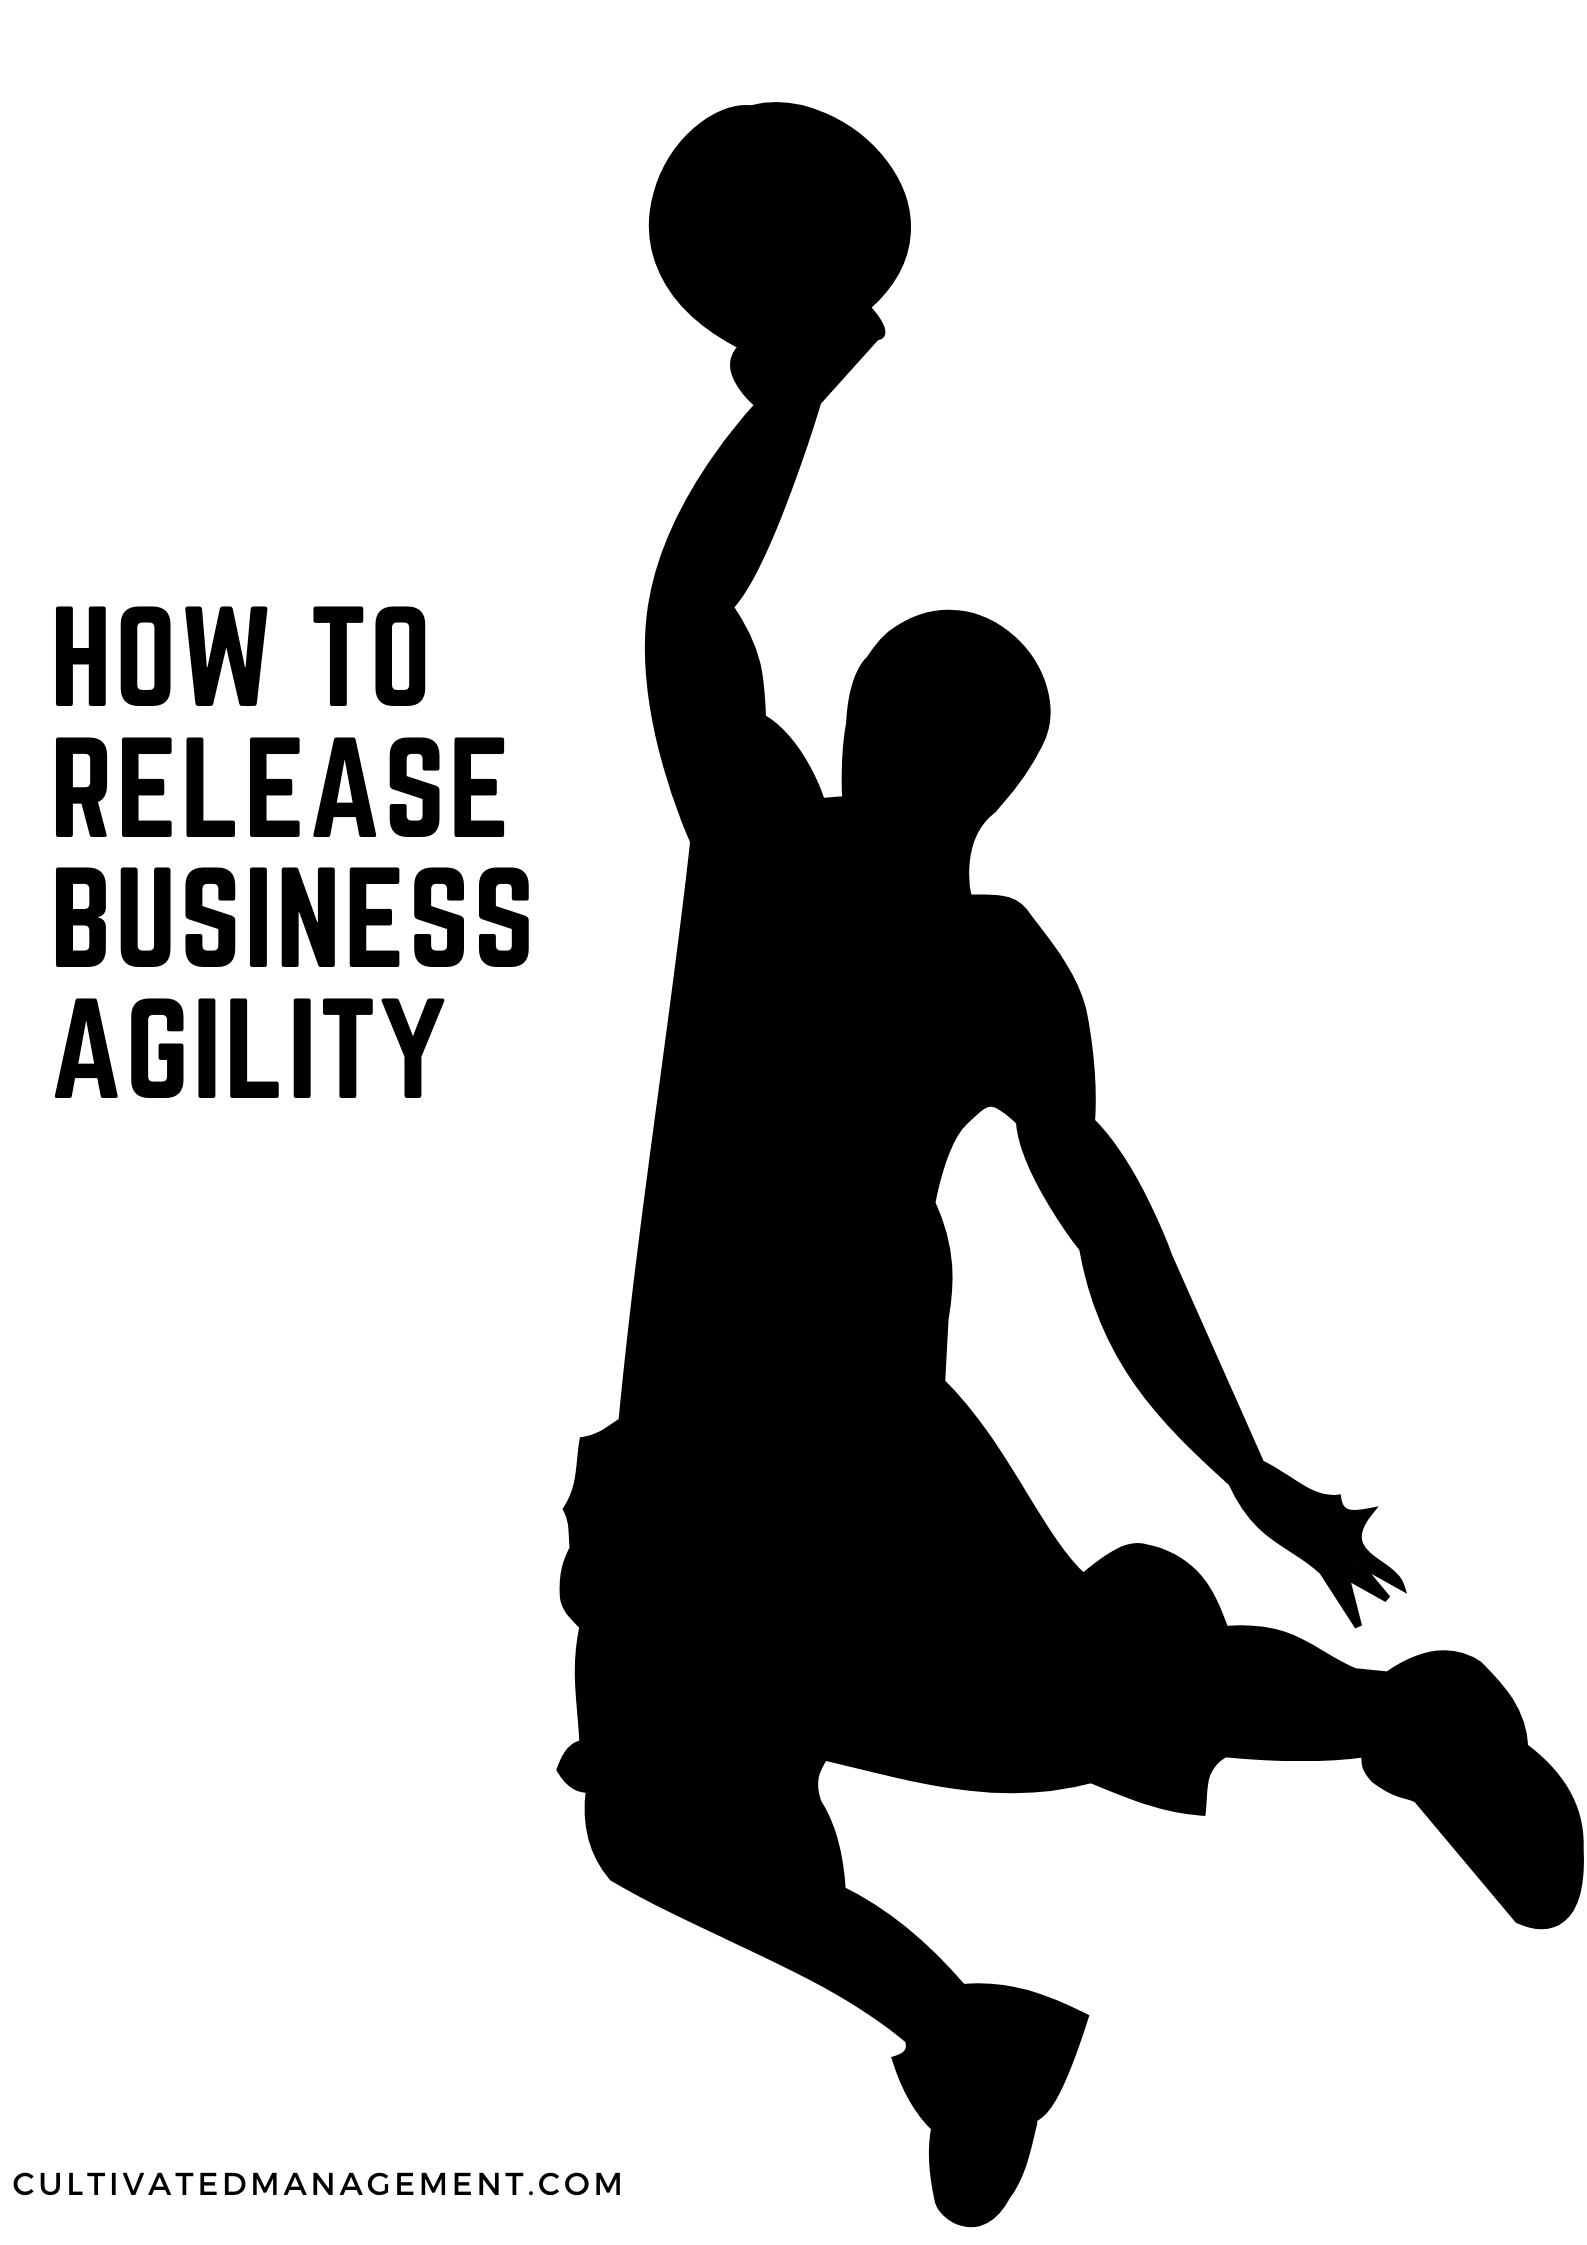 How to release business agility